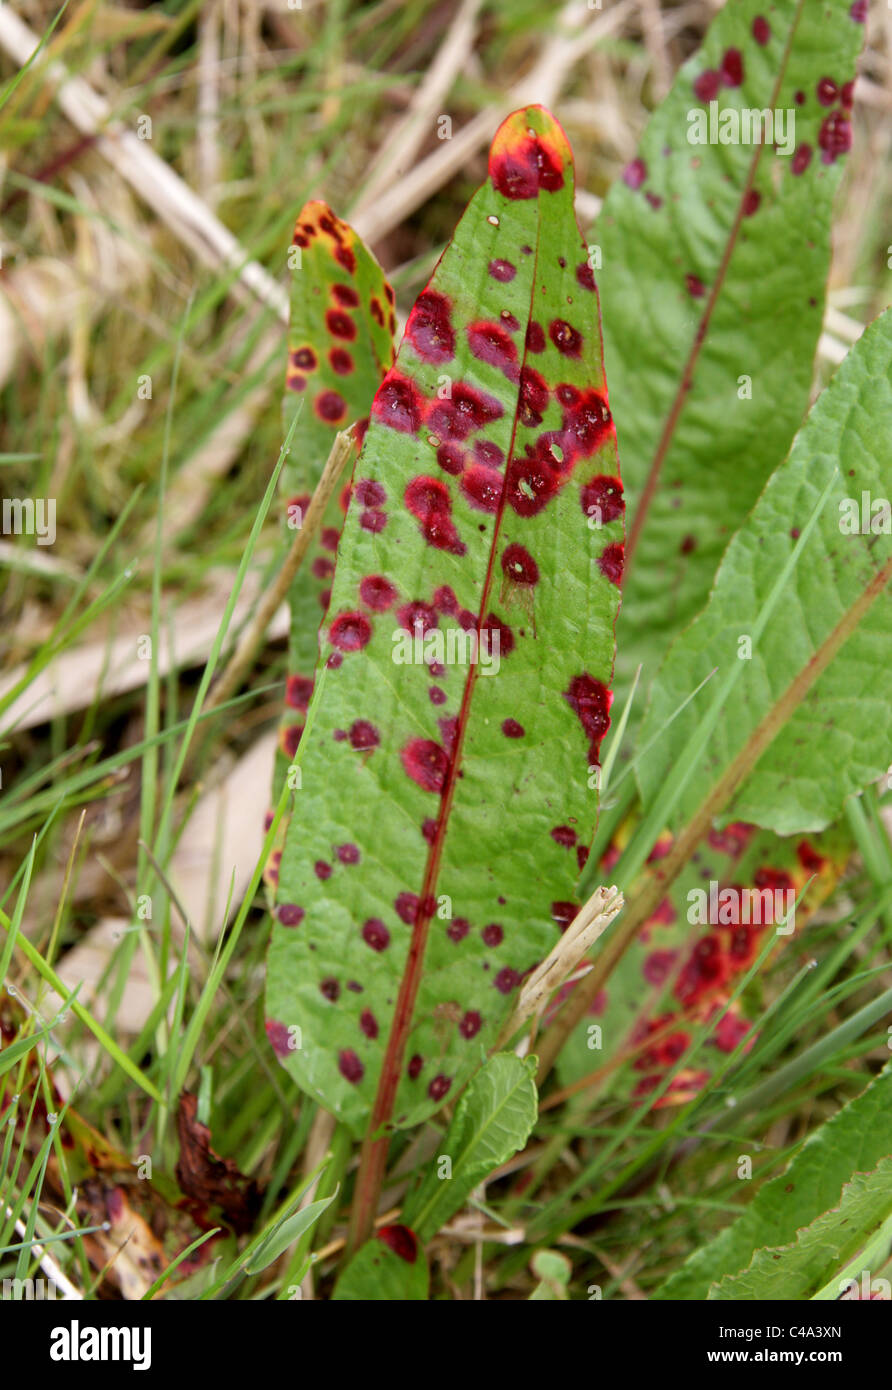 Red Fungal Galls on Dock Caused by Rust Fungus, Puccinia phragmitis, Pucciniaceae, Uredinales, Fungi. Stock Photo